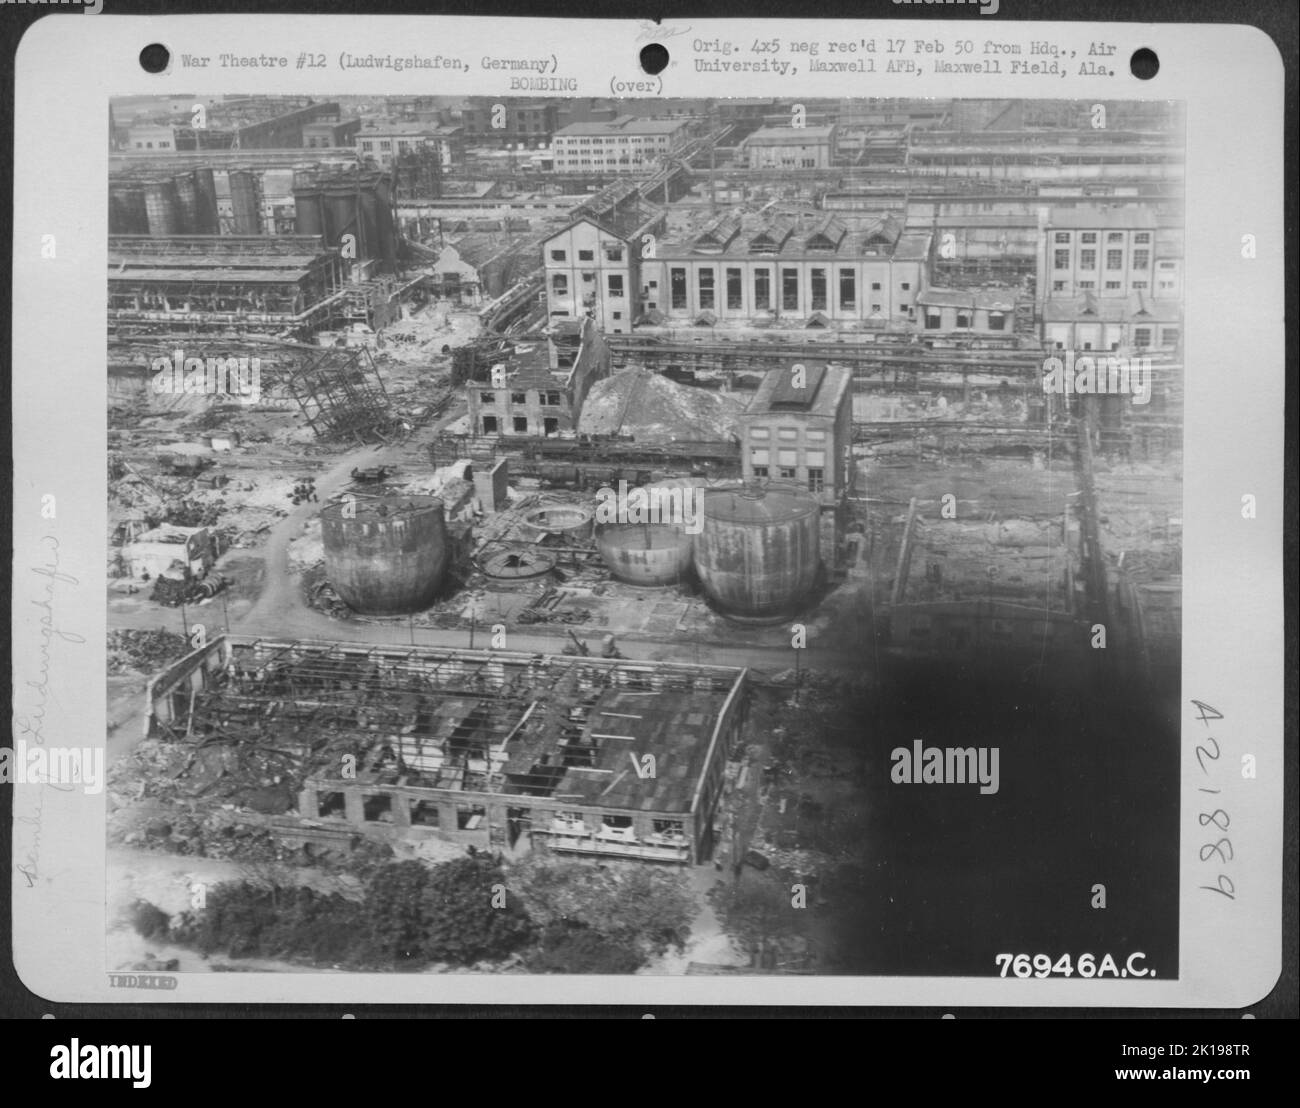 An Aerial View Of The Vast I.G. Farbenindustrie Synthetic Chemical Plant In Ludwigshafen, Germany, Showing Damage Due To Allied Air Attacks. Stock Photo